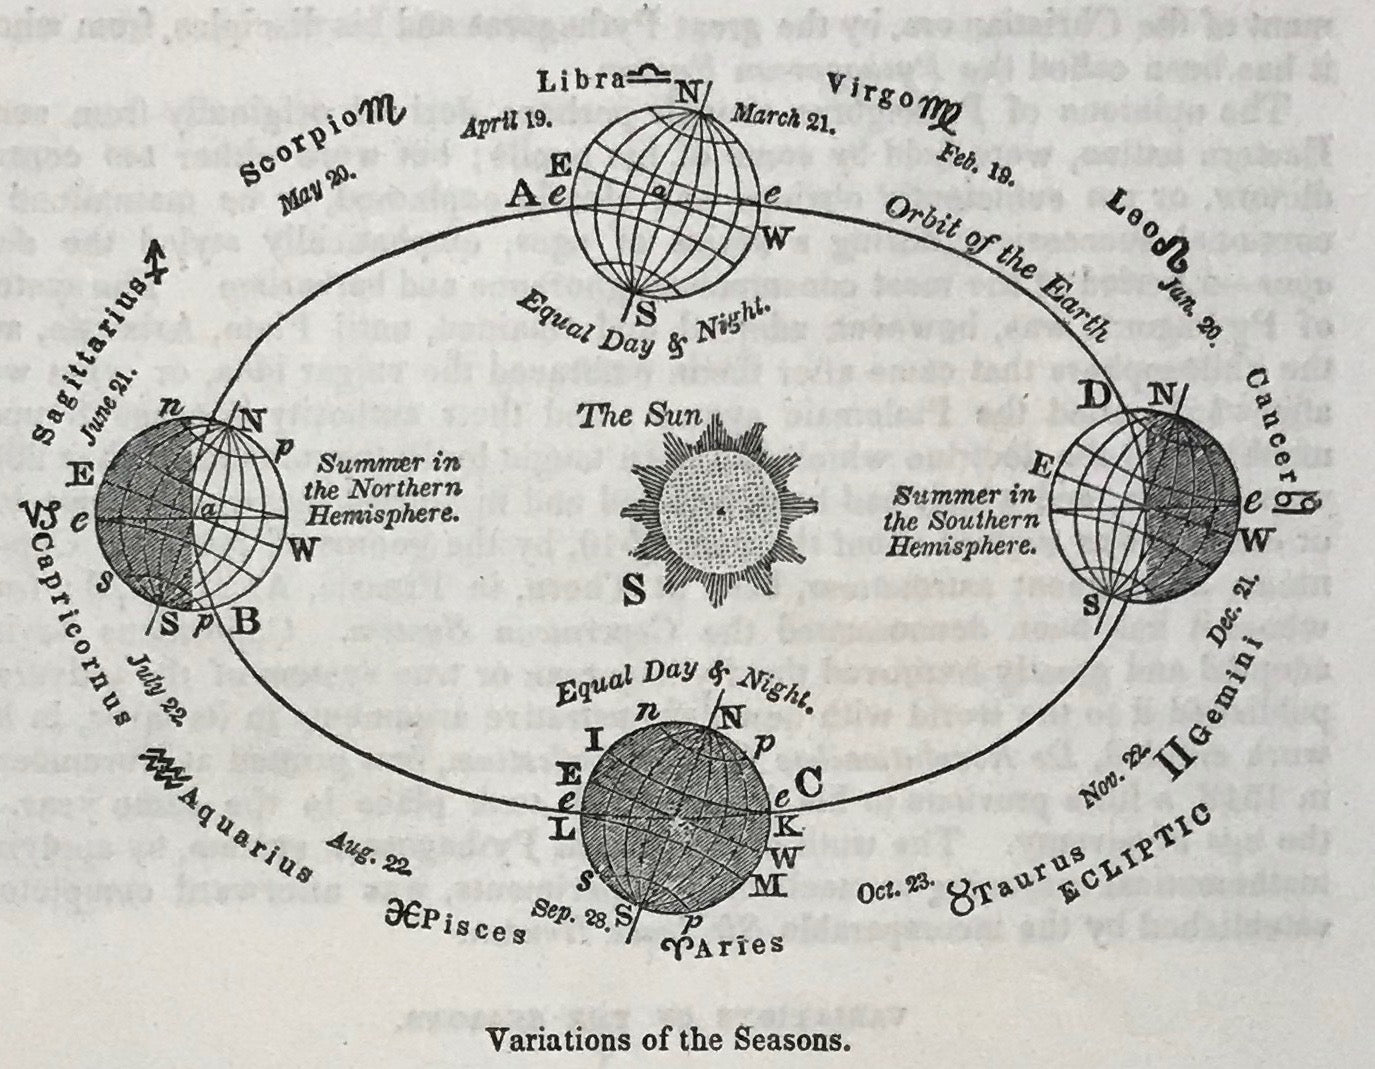 Astronomy, "Variations of the Seasons"  Wood engraving with text published 1844. More text on reverse side.